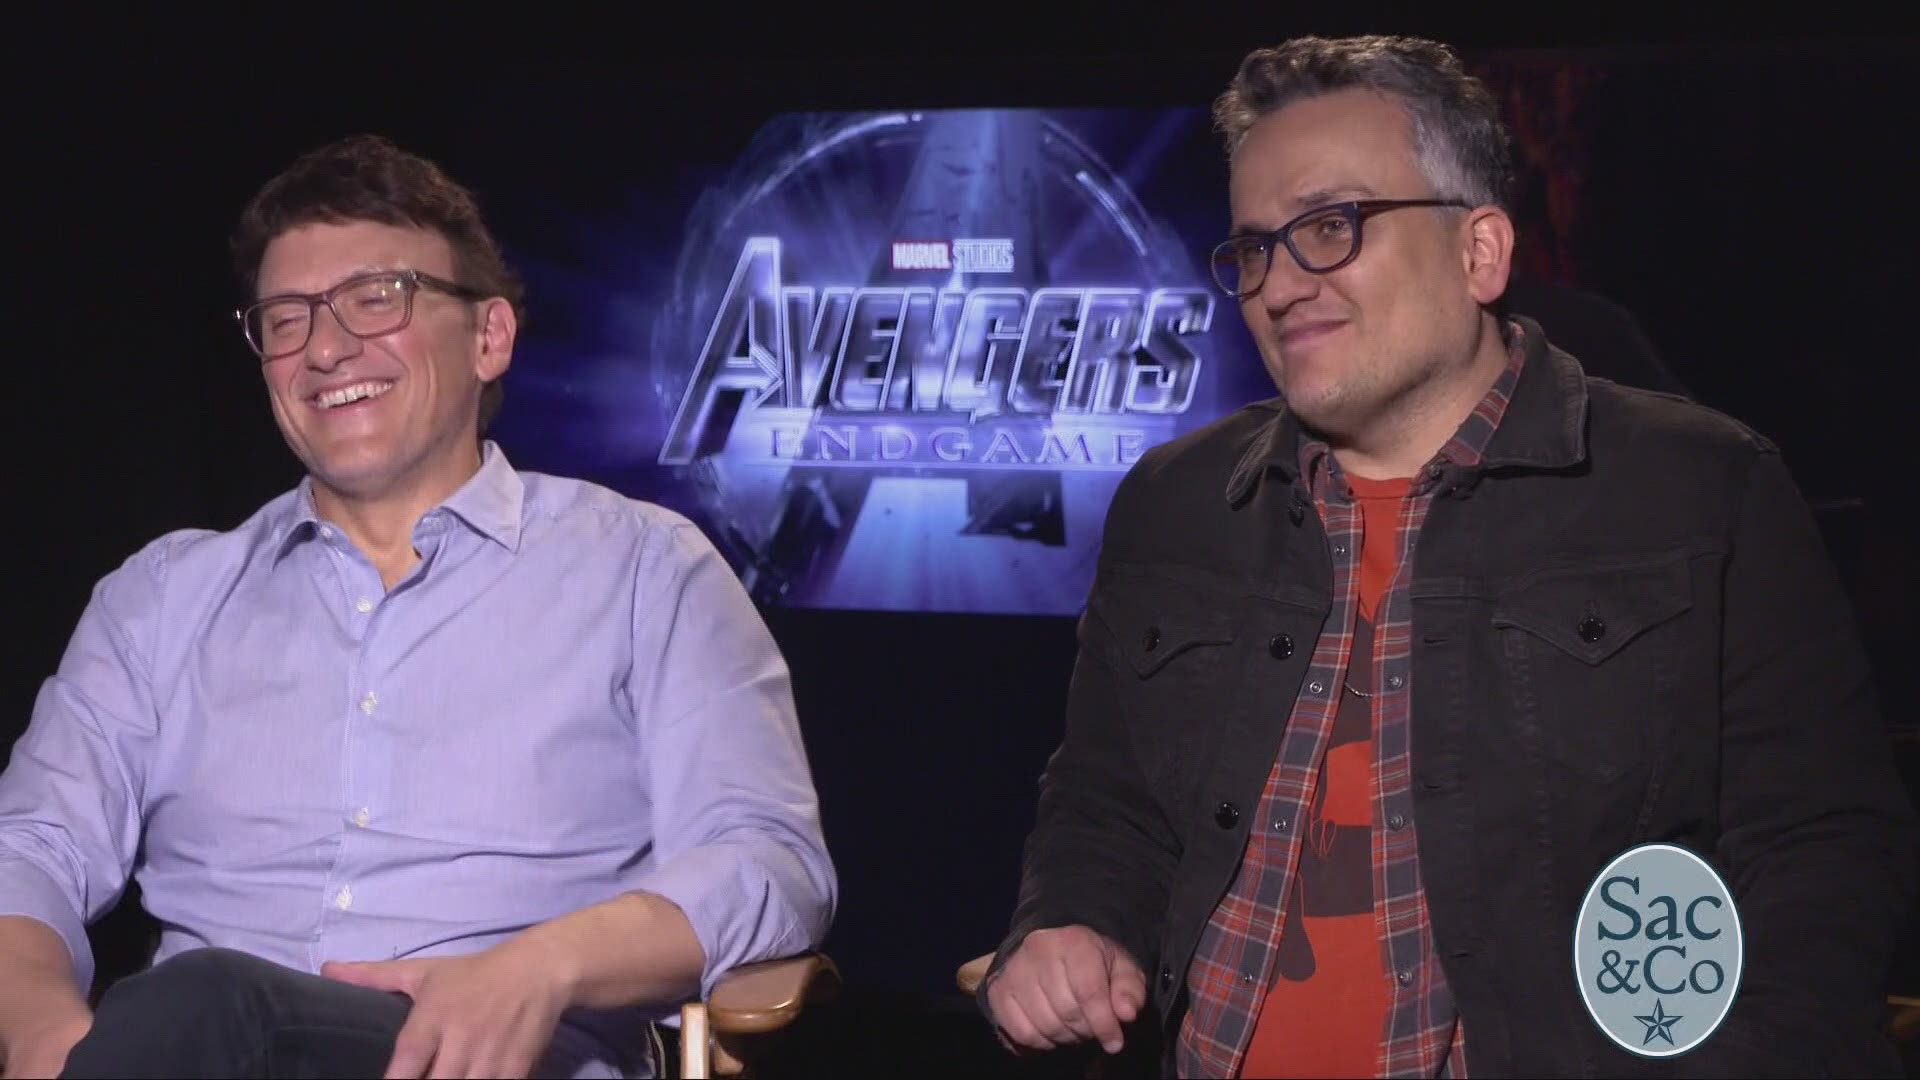 Extra Butter’s Mark S. Allen talks to the Russo Brothers! Get the latest scoop on Avengers: Endgame!